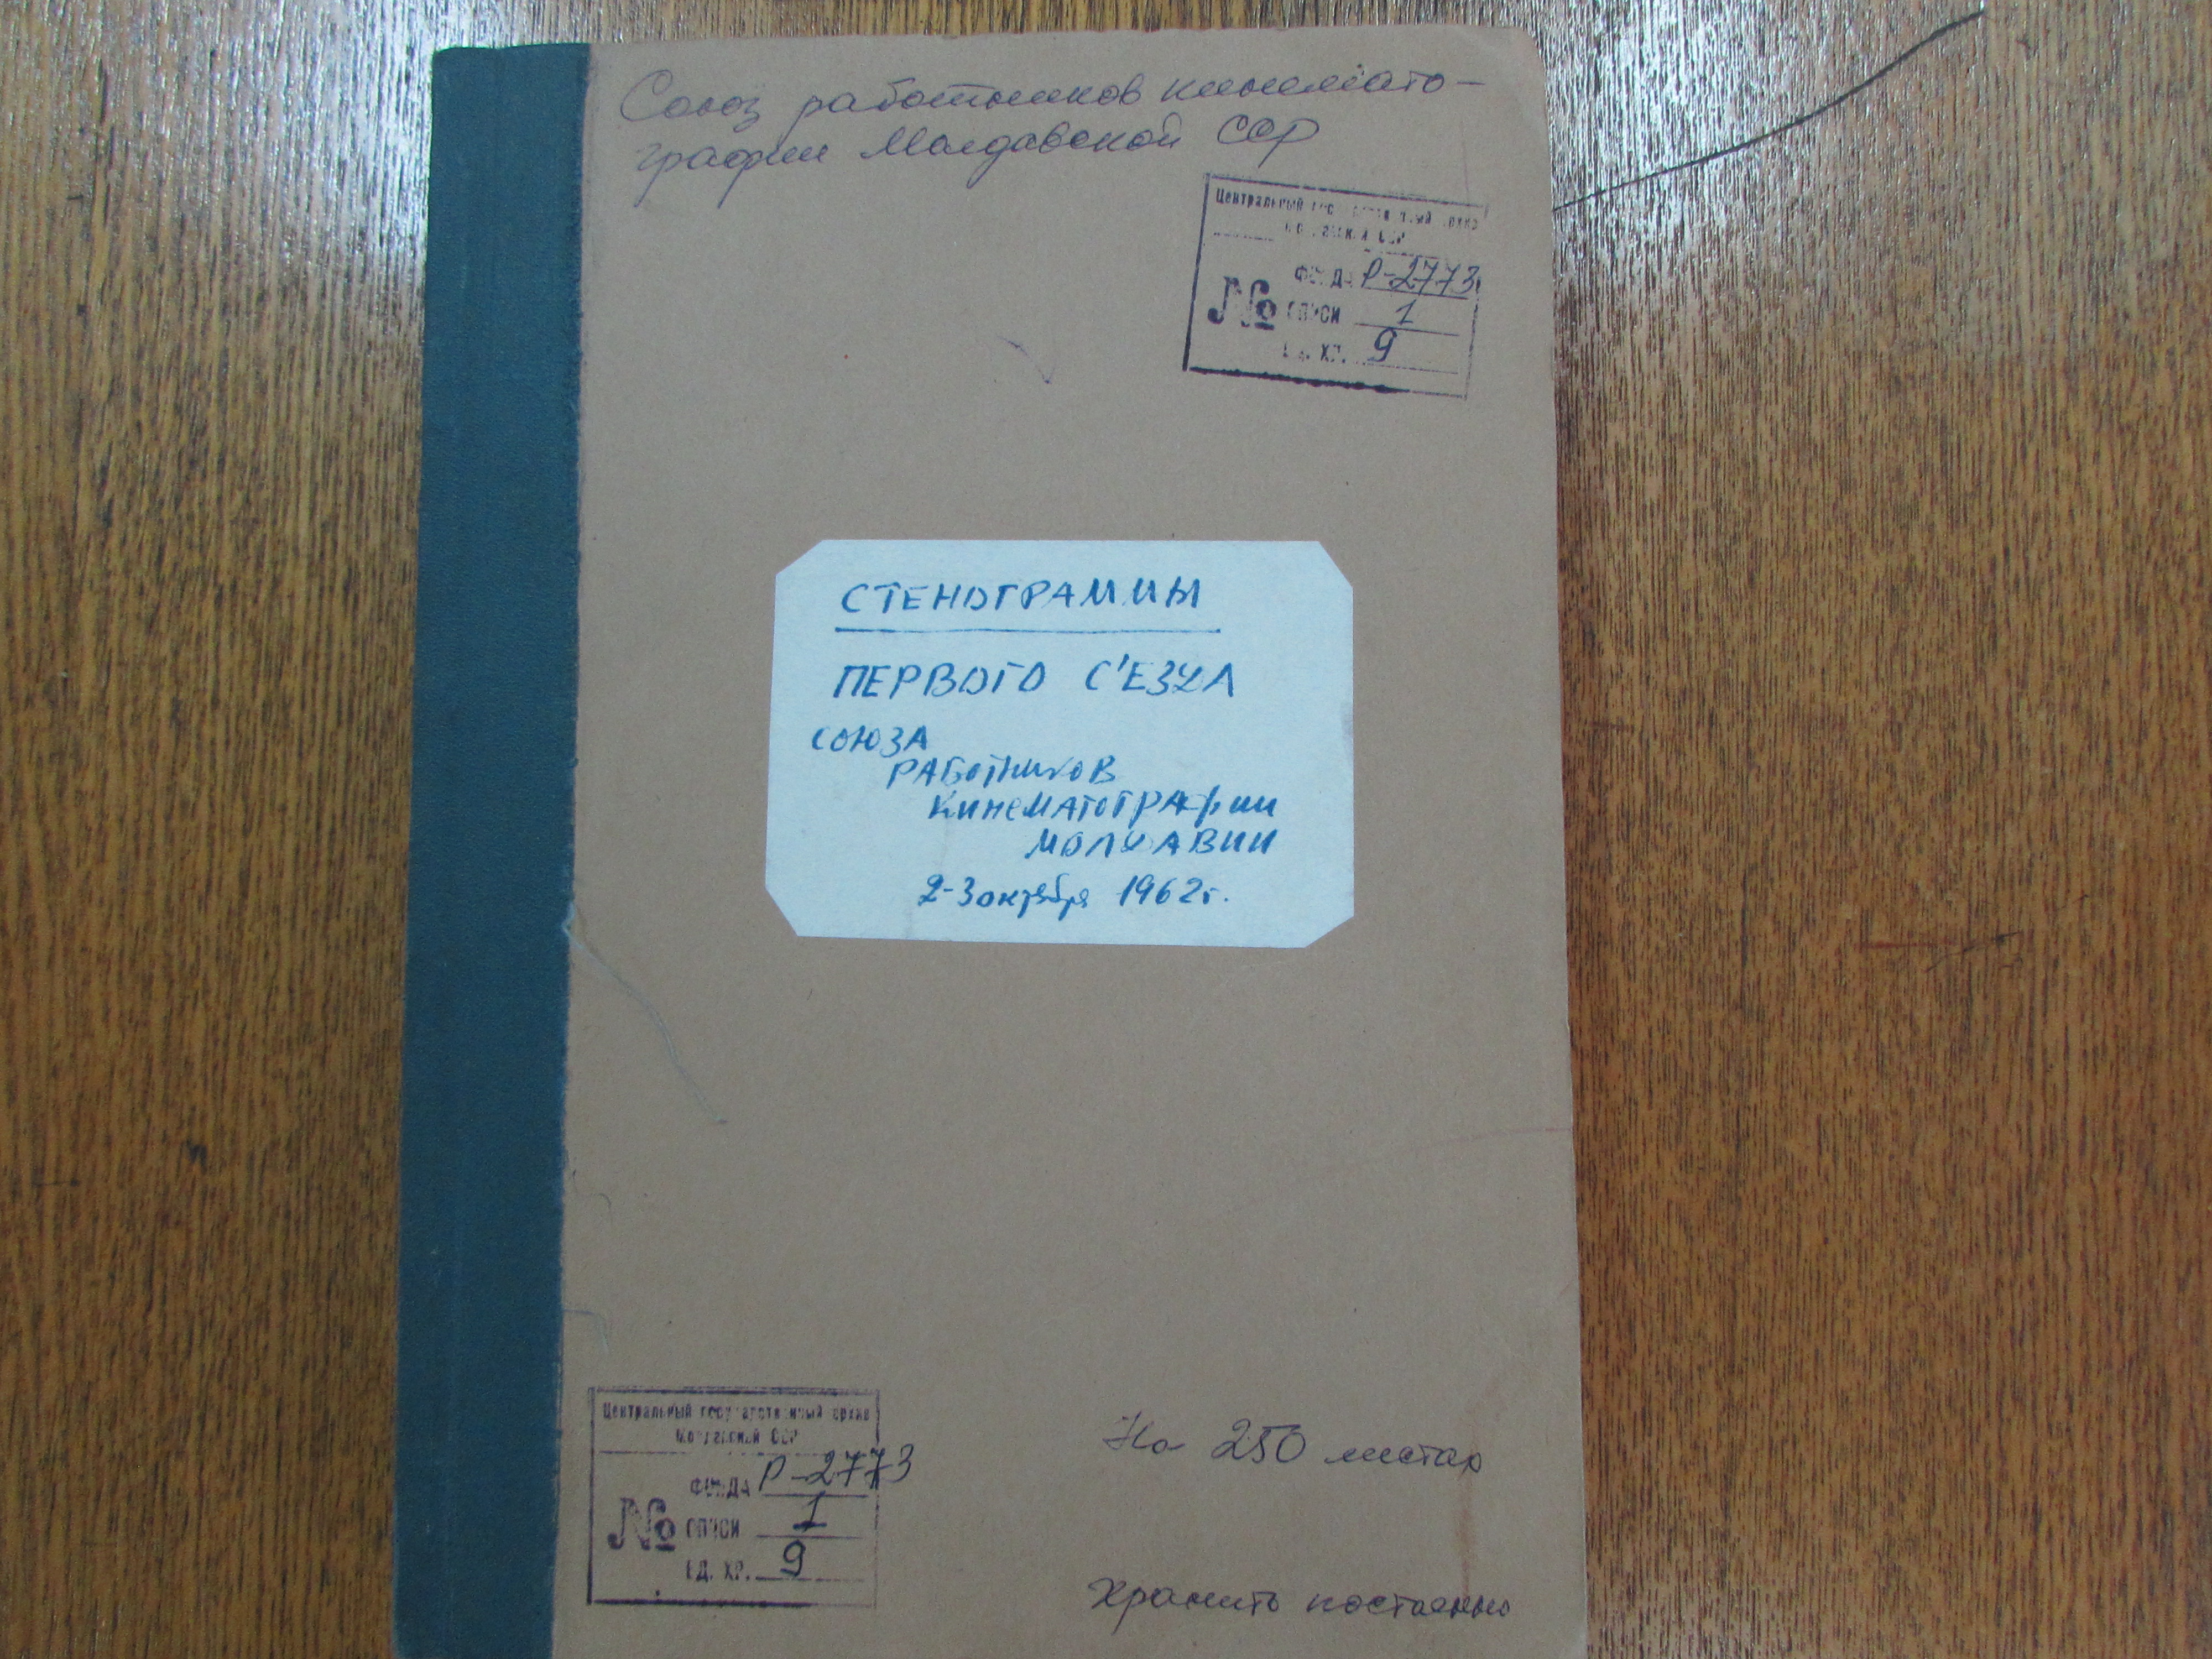 Cover of the AOSPRM file on the First Congress of the MUC (2-3 October 1962) 